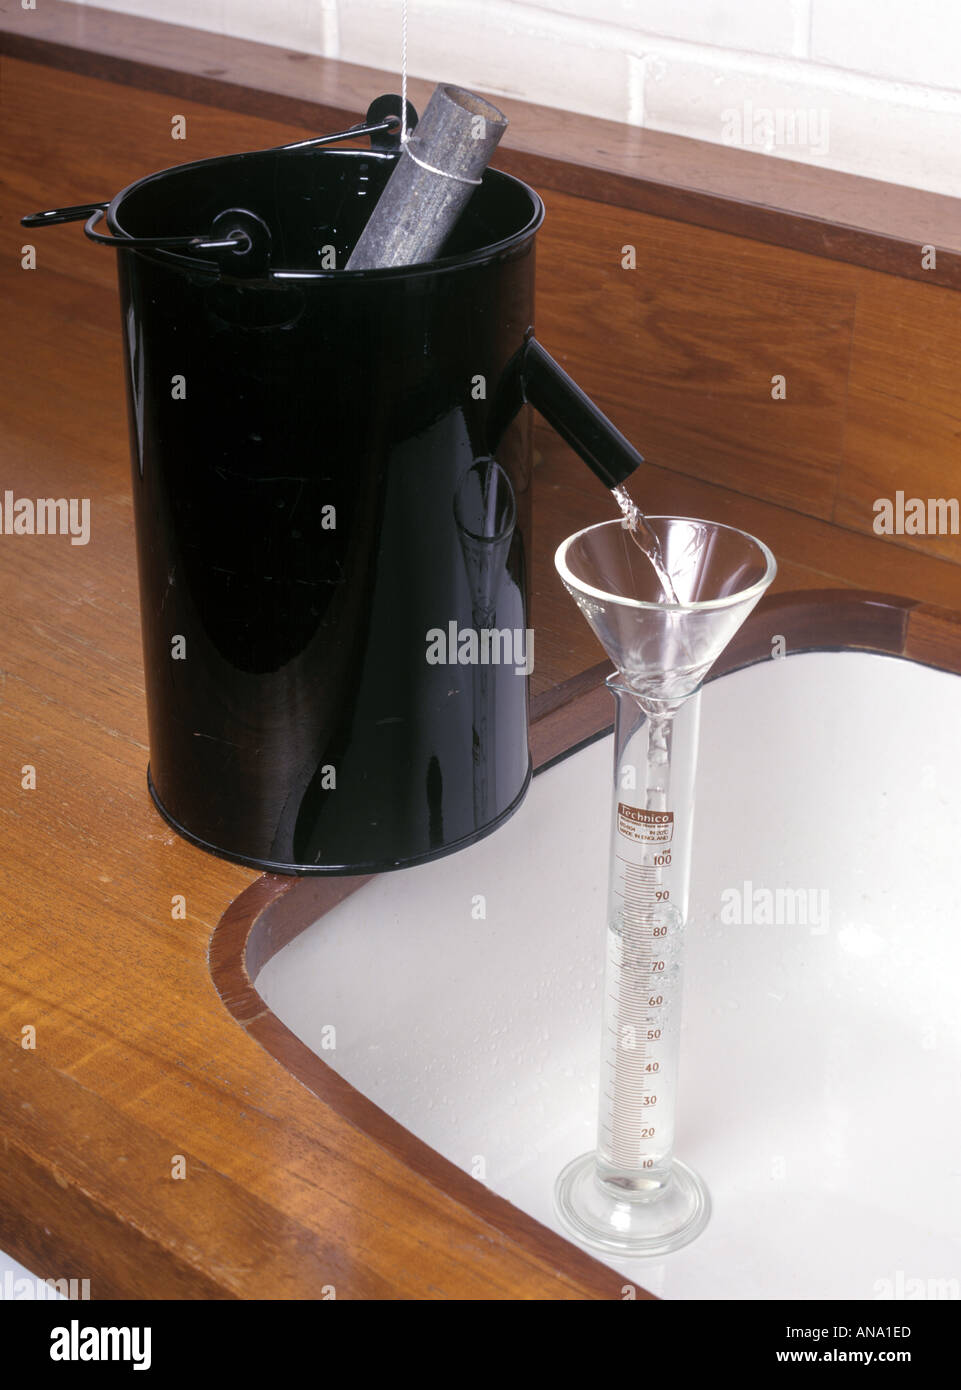 object lowered into displacement can to measure its volume Stock Photo